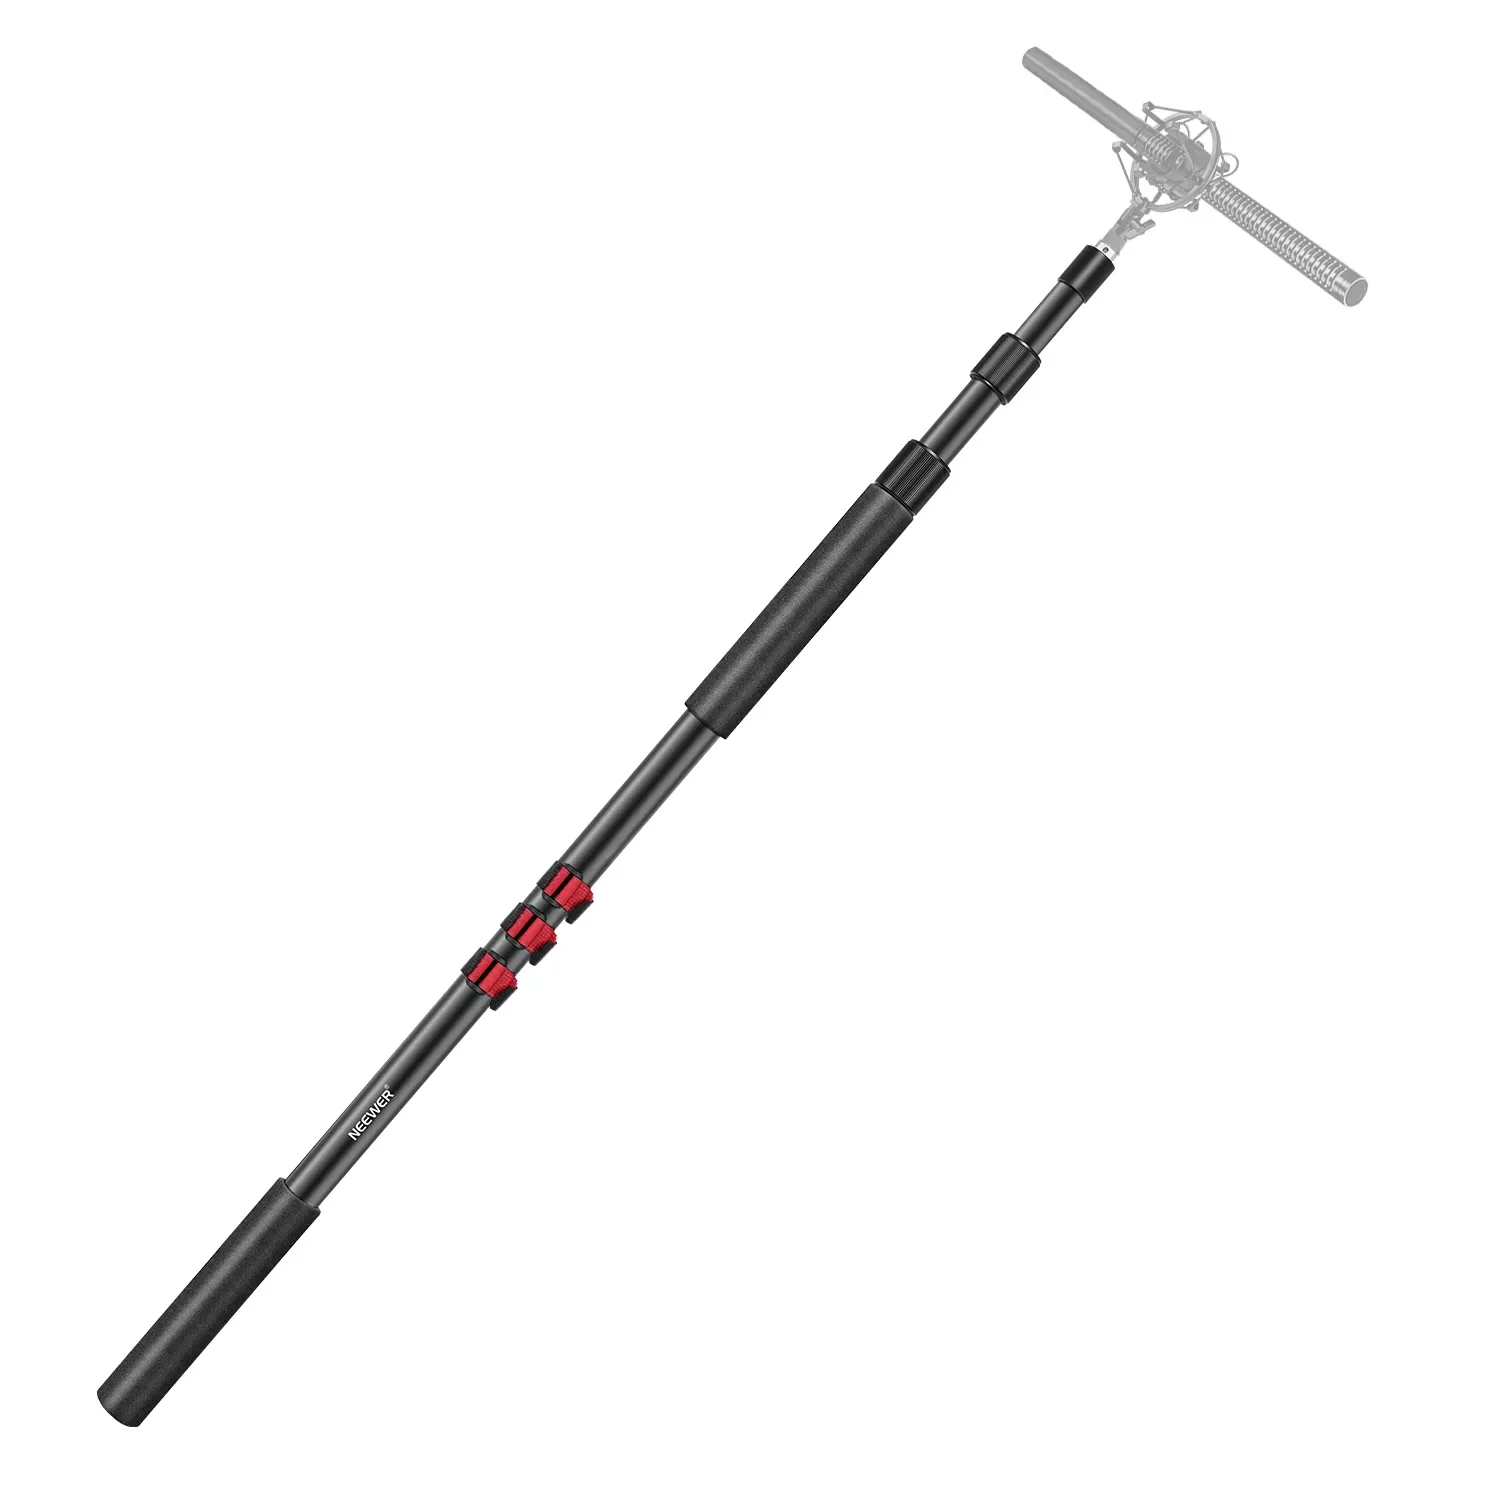 Enlarge NEW NEW Neewer NW-7000 Microphone Boom Arm, 3-Section Extendable Handheld Mic Arm with 1/4